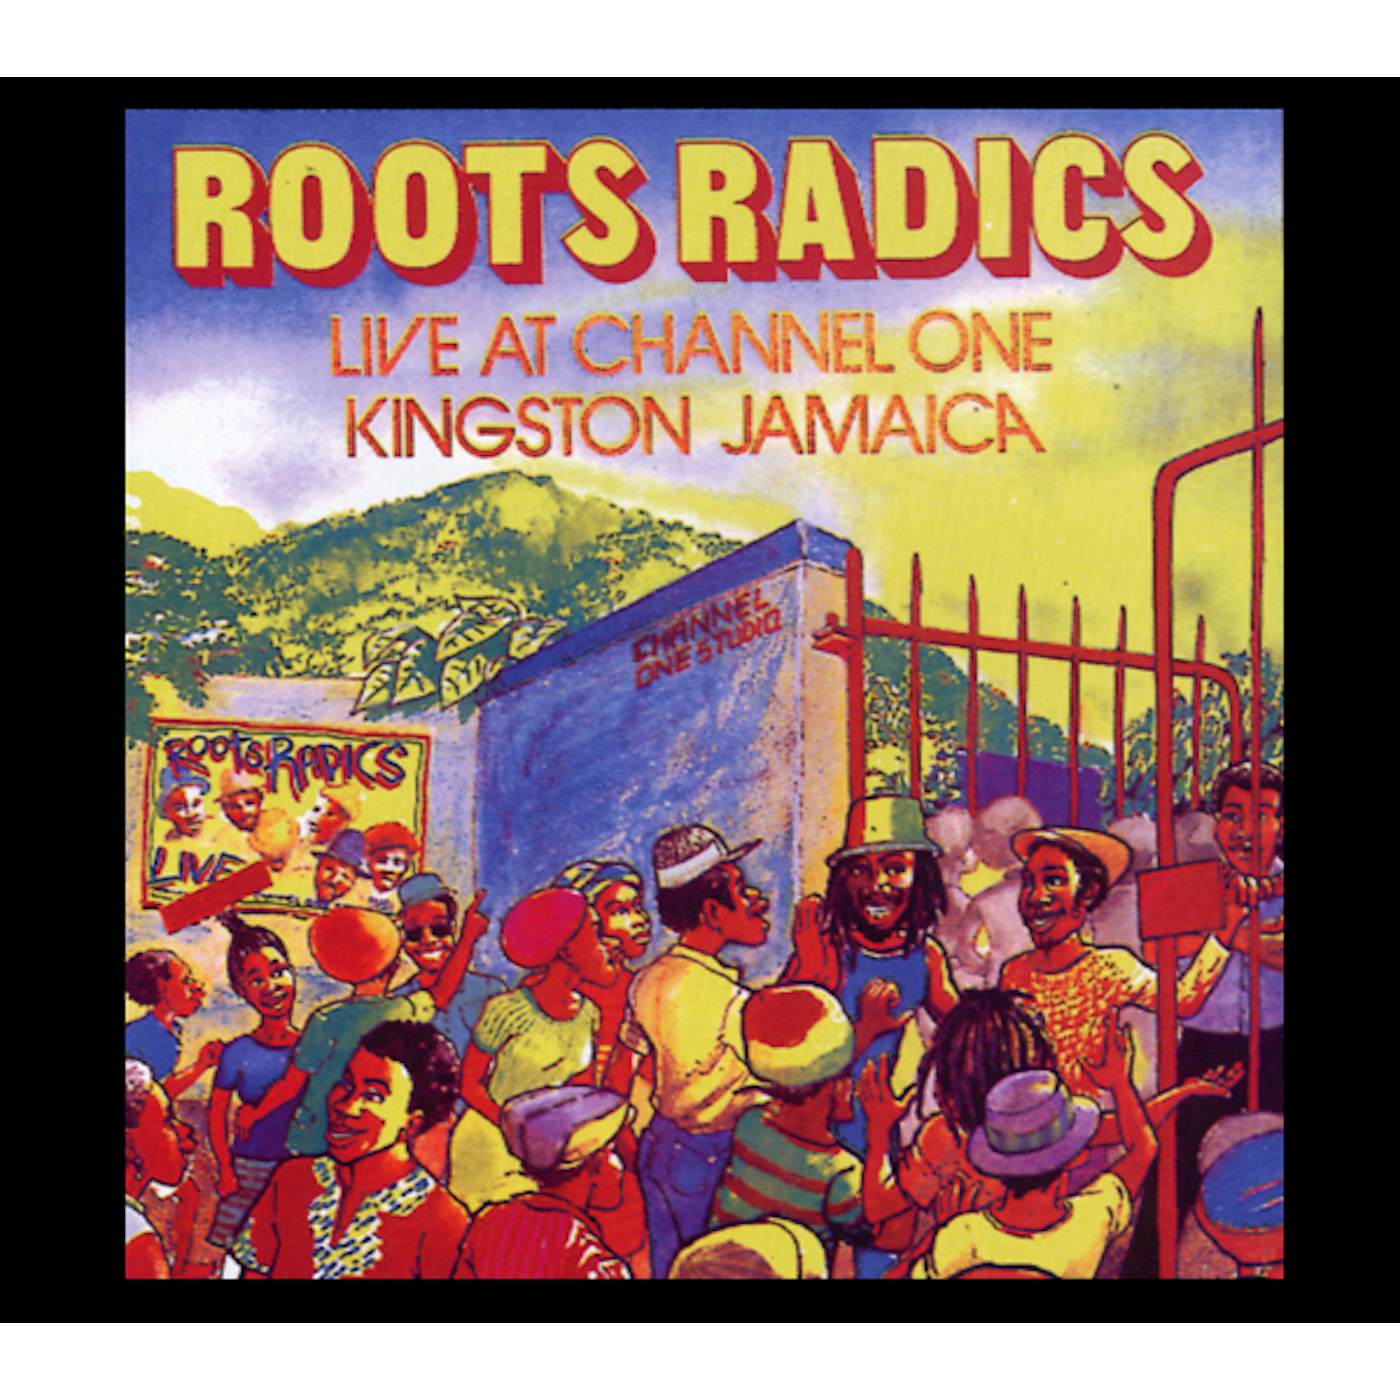 Roots Radics LIVE AT CHANNEL ONE KINGSTON JAMAICA CD